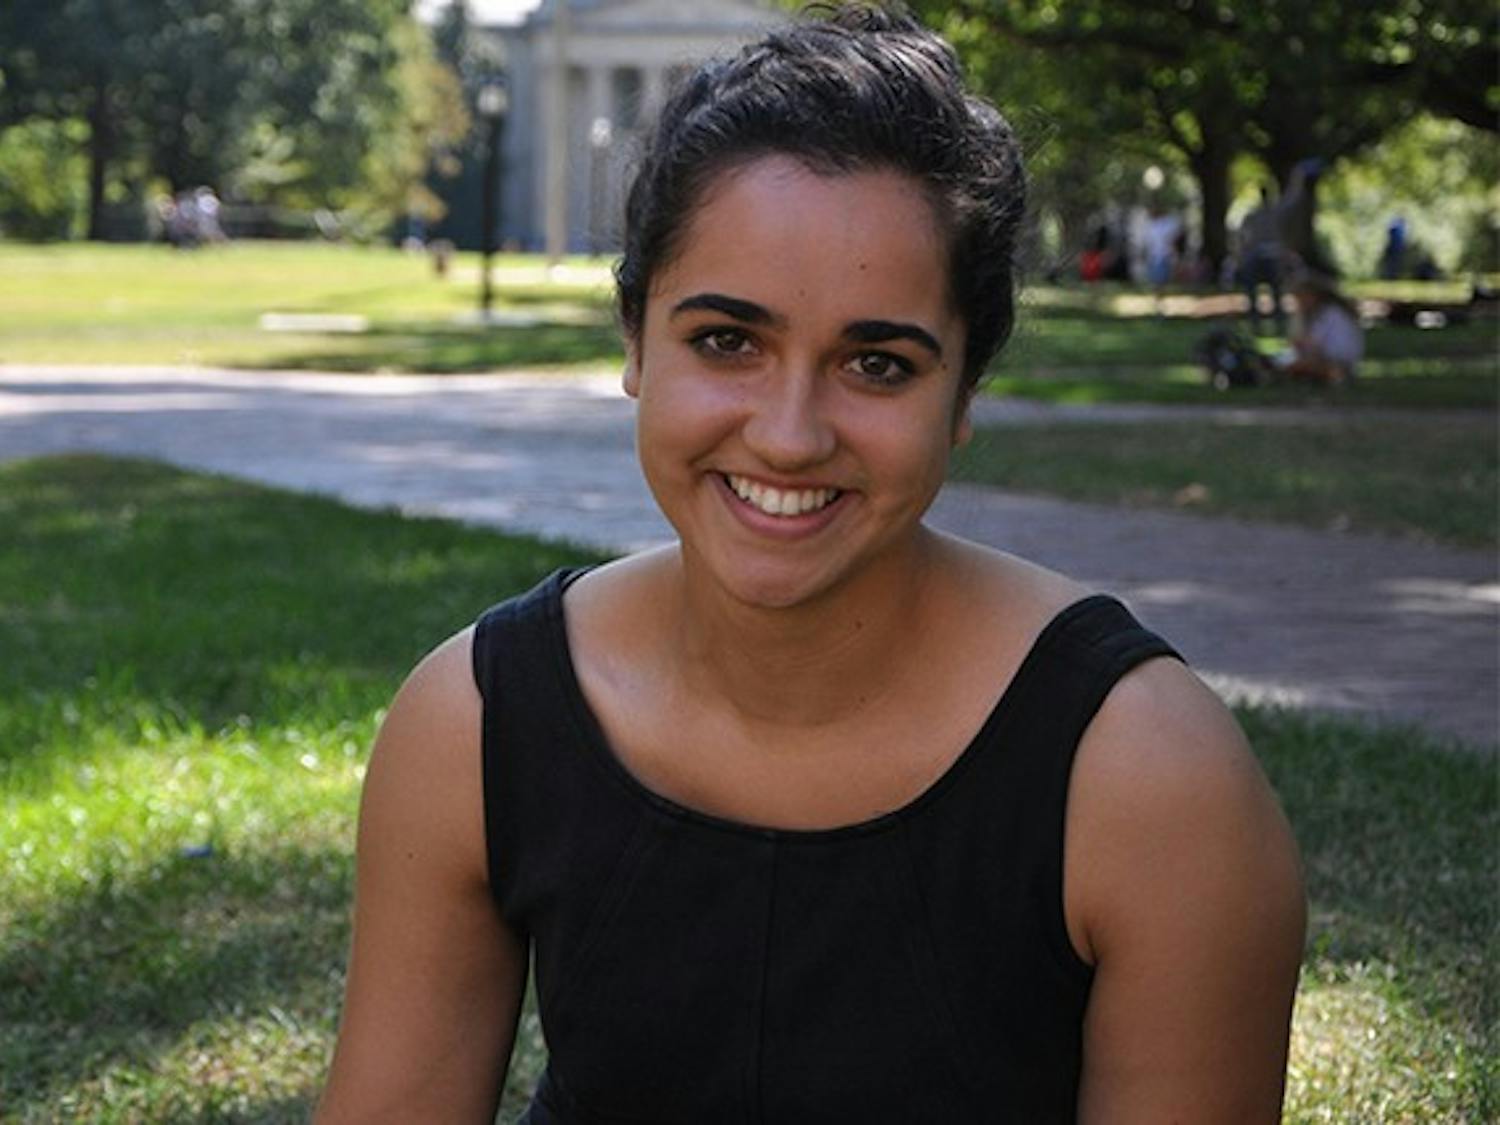 Kiran Bhardwaj, a fourth year Royster Fellow, will be serving as the President of the Graduate and Professional Student Federation in 2013-2014.